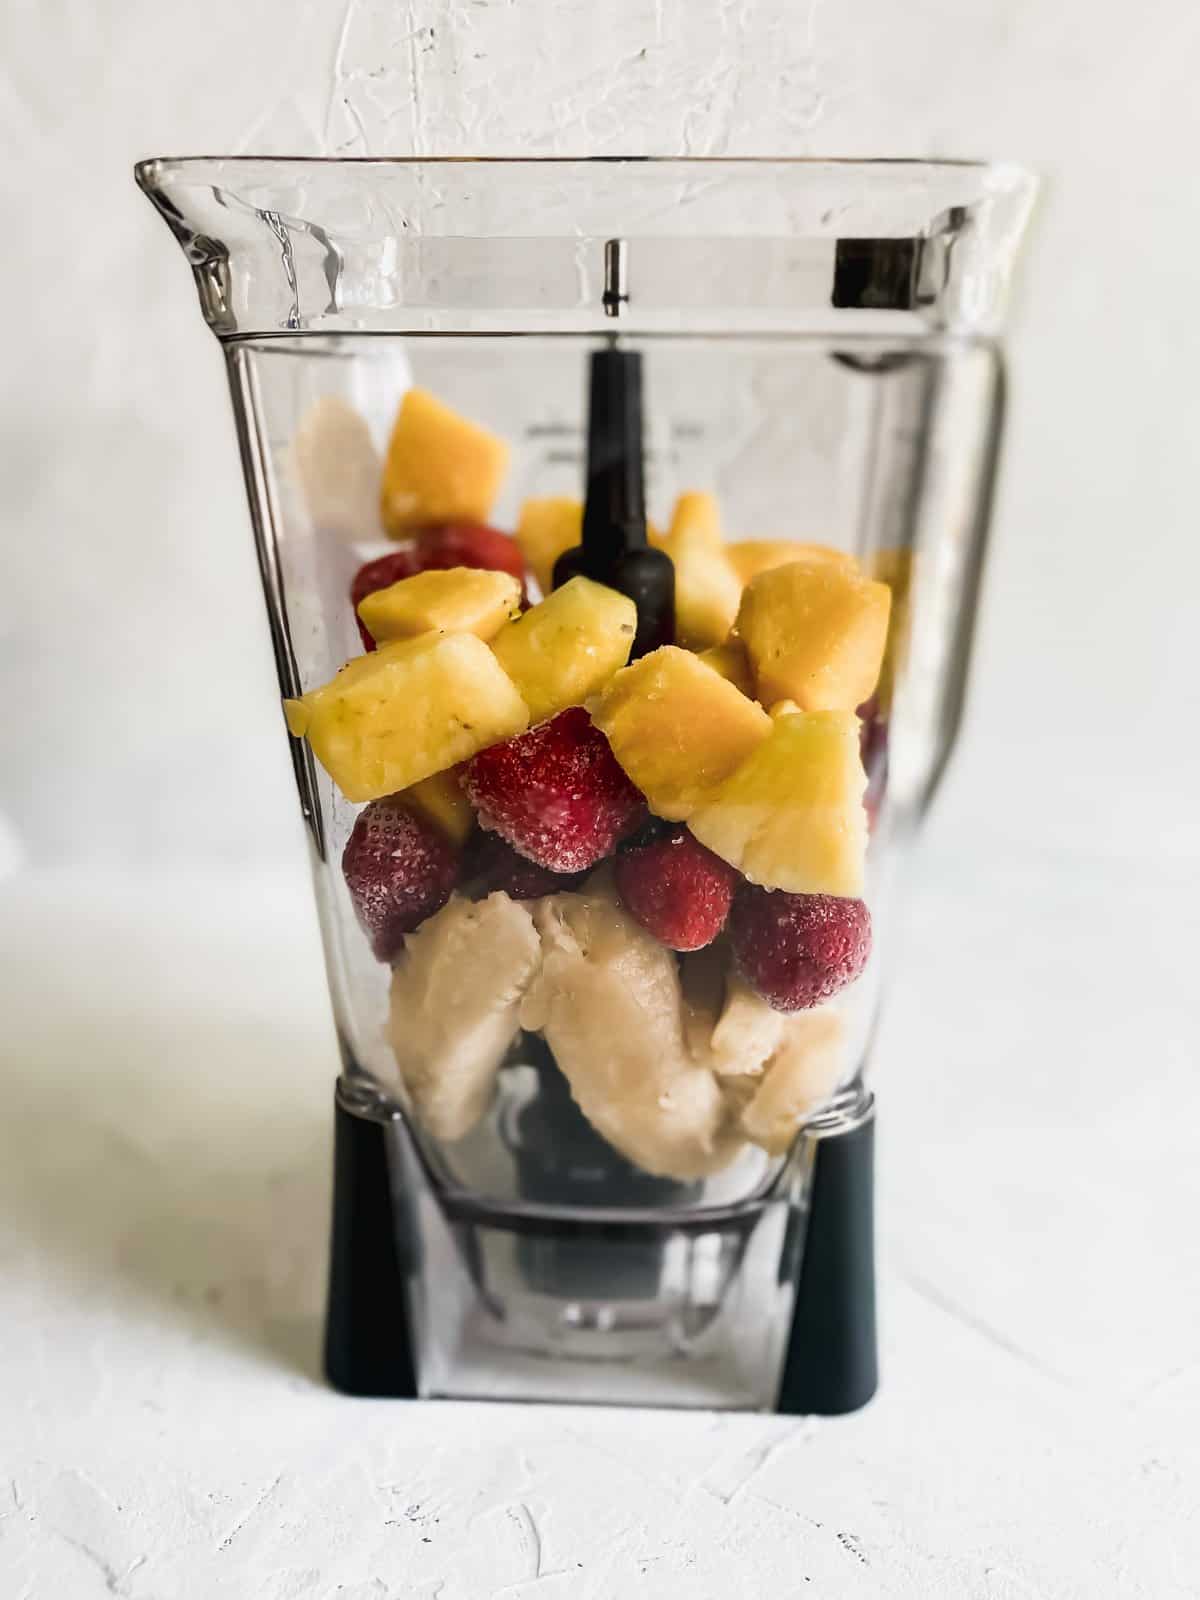 frozen strawberries and pineapples in a blender with fresh bananas